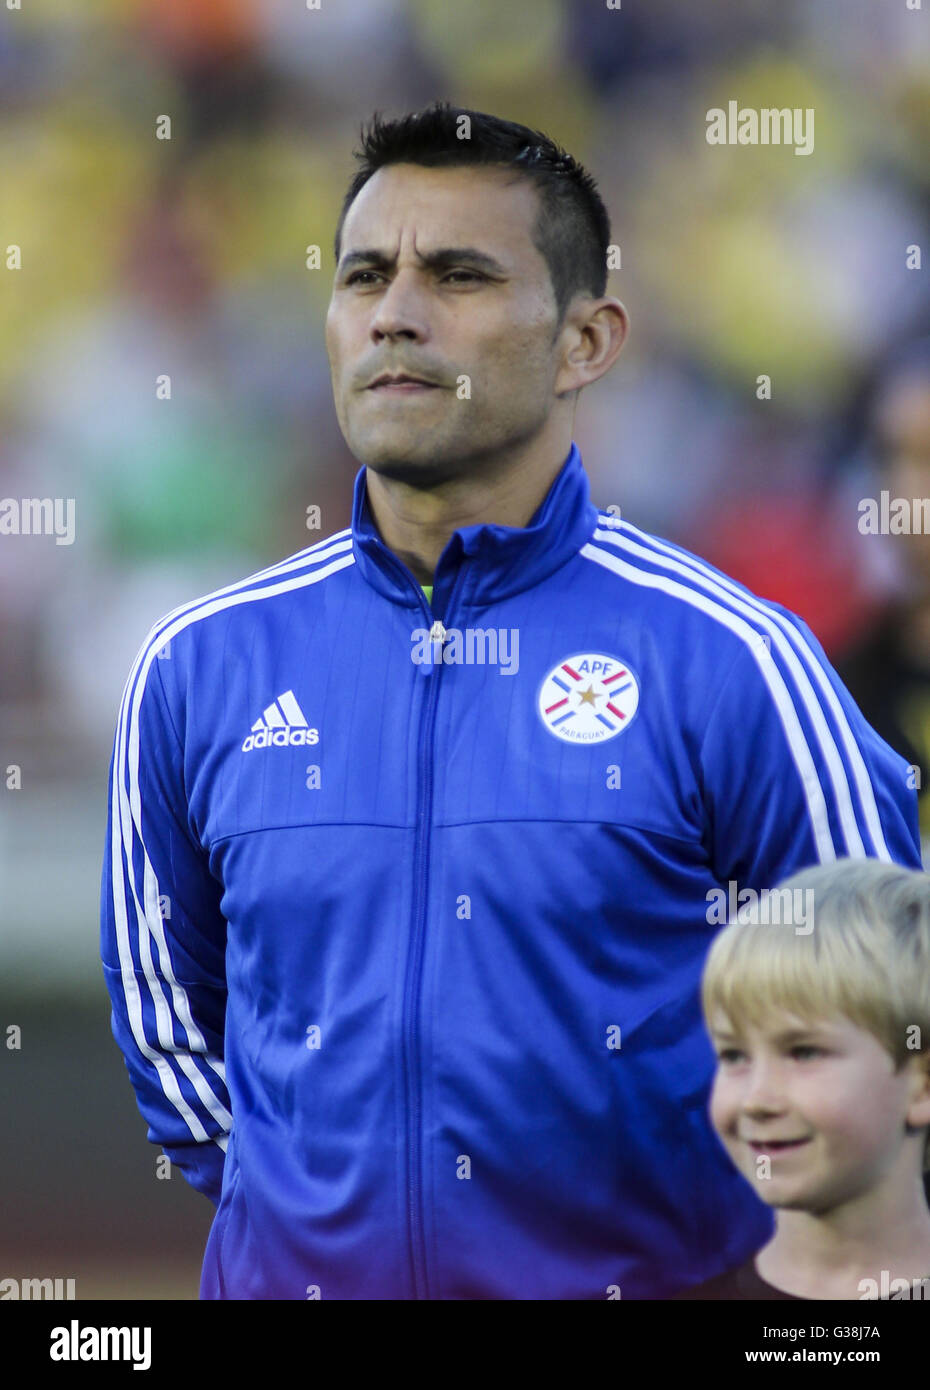 Los Angeles, California, USA. 7th June, 2016. Paraguay goalkeeper Justo Villar in the Copa America soccer match against Colombia at Rose Bowl in Pasadena, California, June 7, 2016. Colombia won 2-1. © Ringo Chiu/ZUMA Wire/Alamy Live News Stock Photo